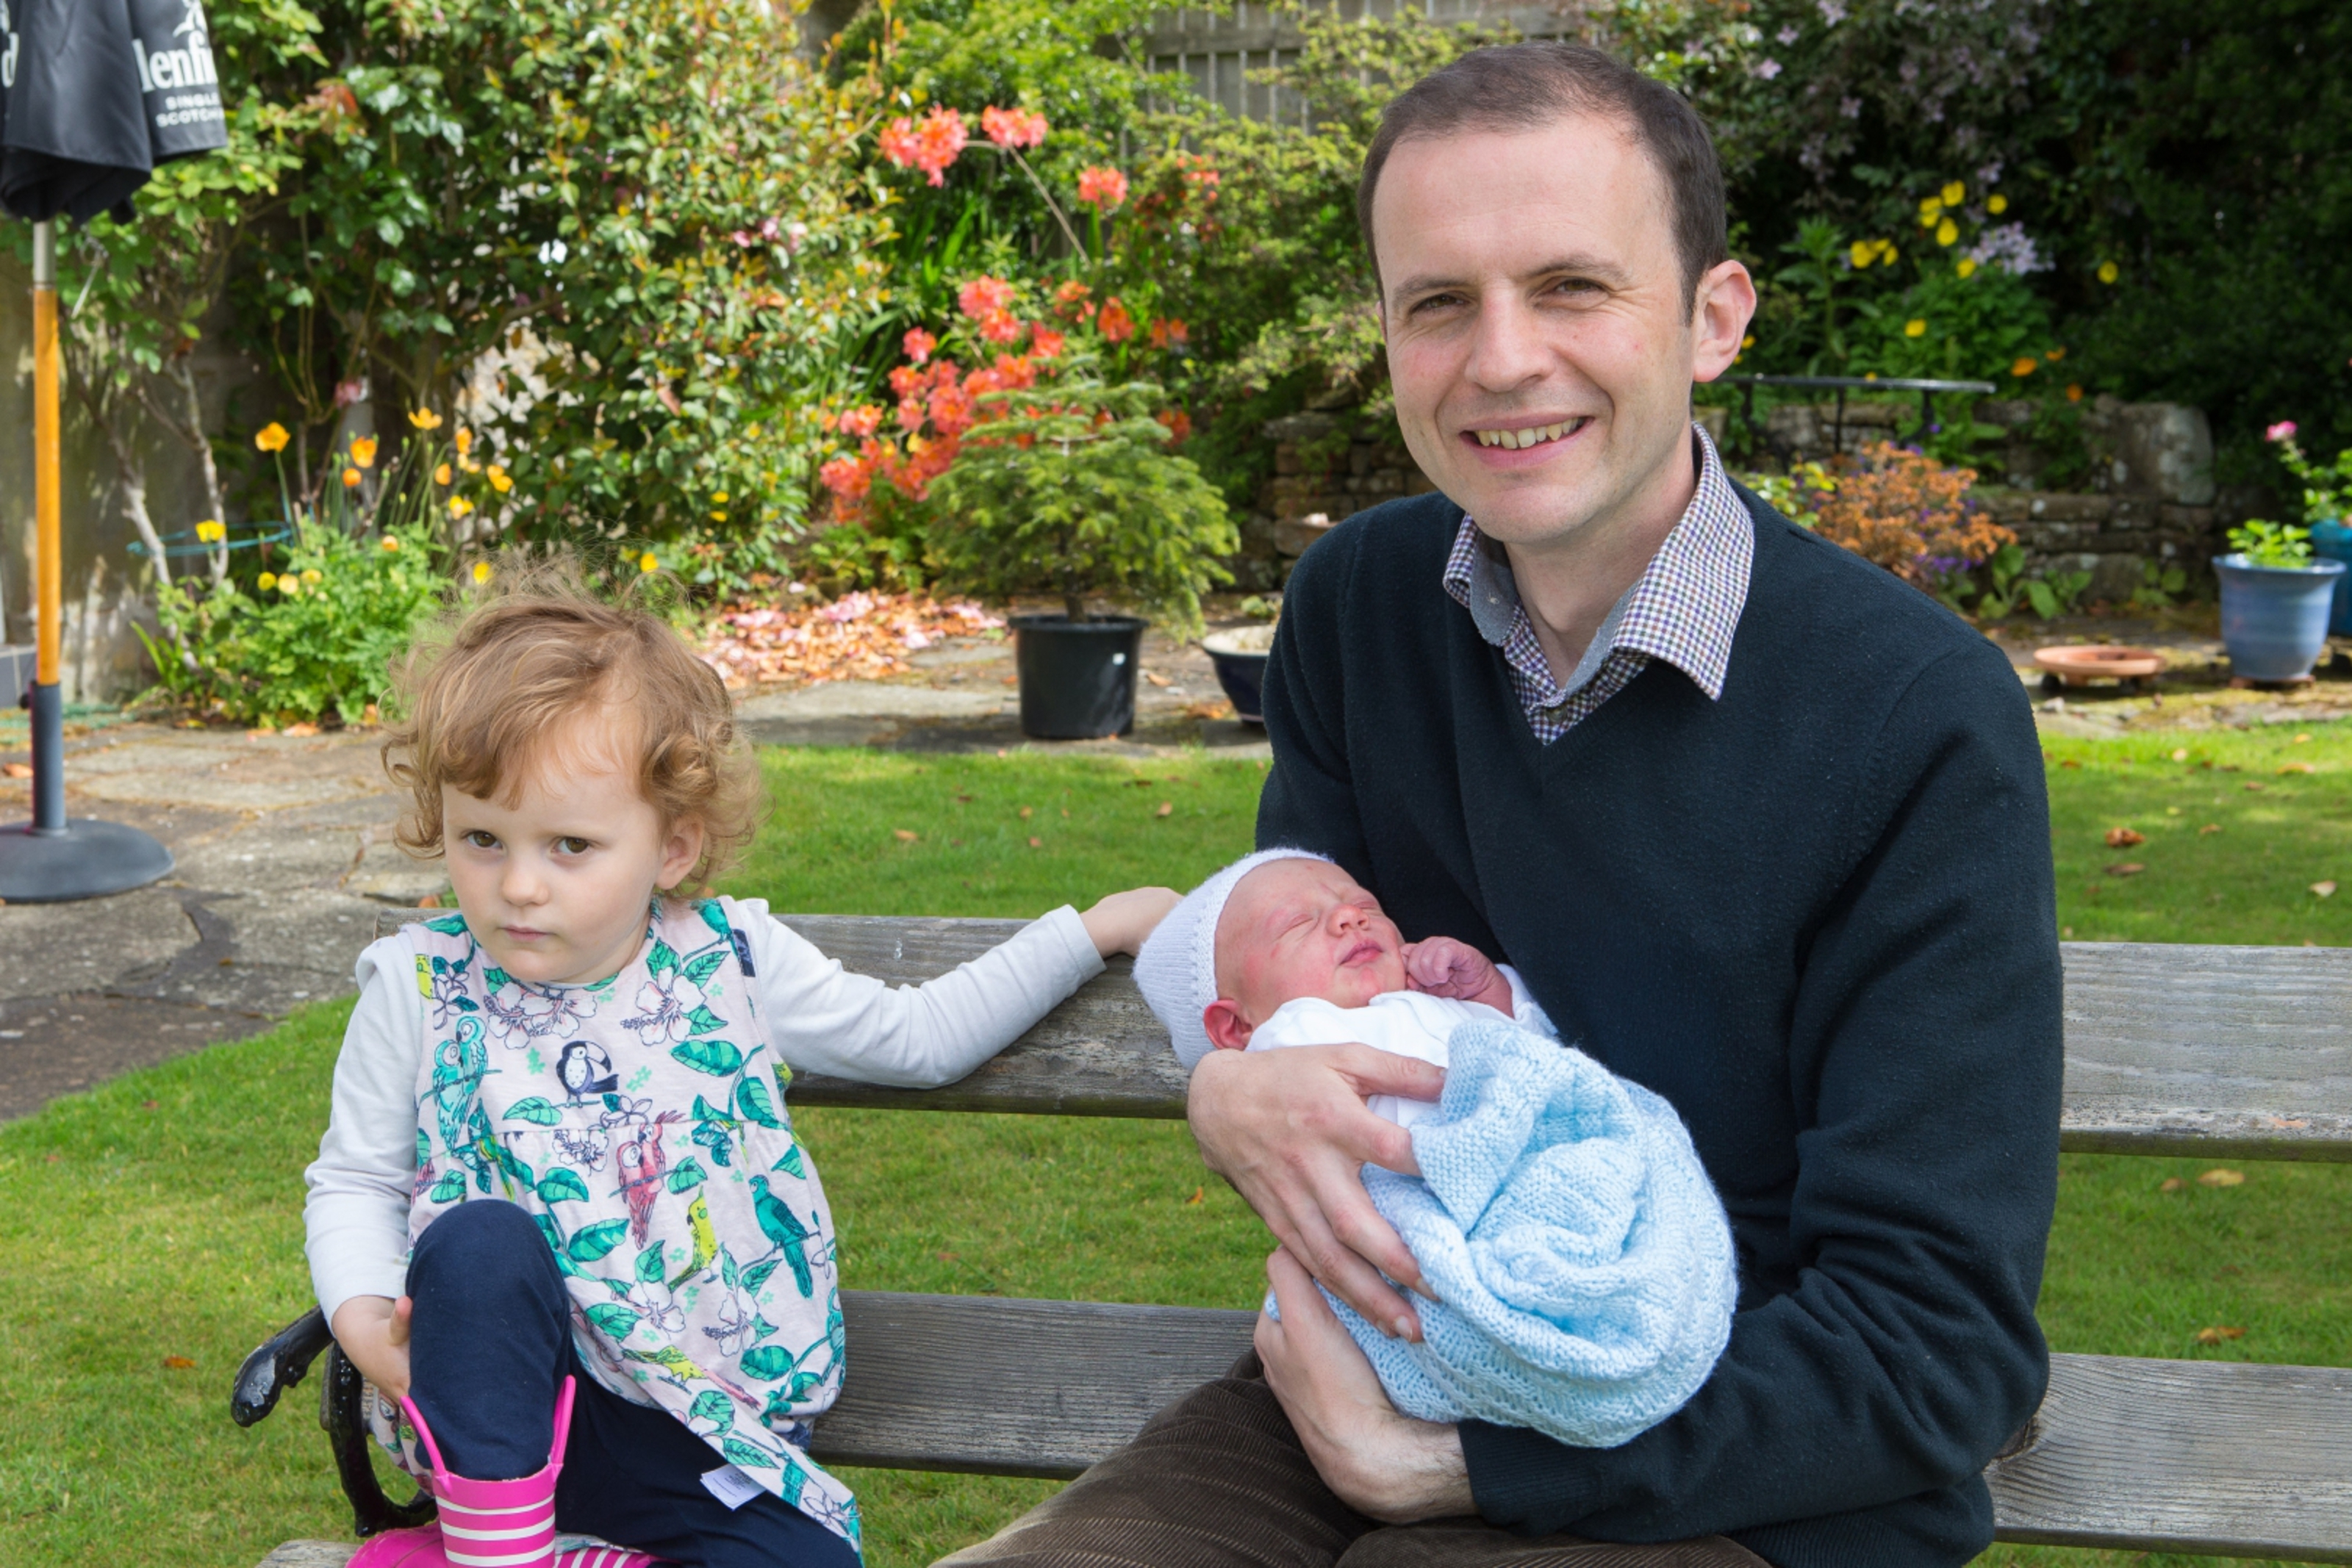 Stephen Gethins with new baby Patrick and two-year-old daughter Mairi.